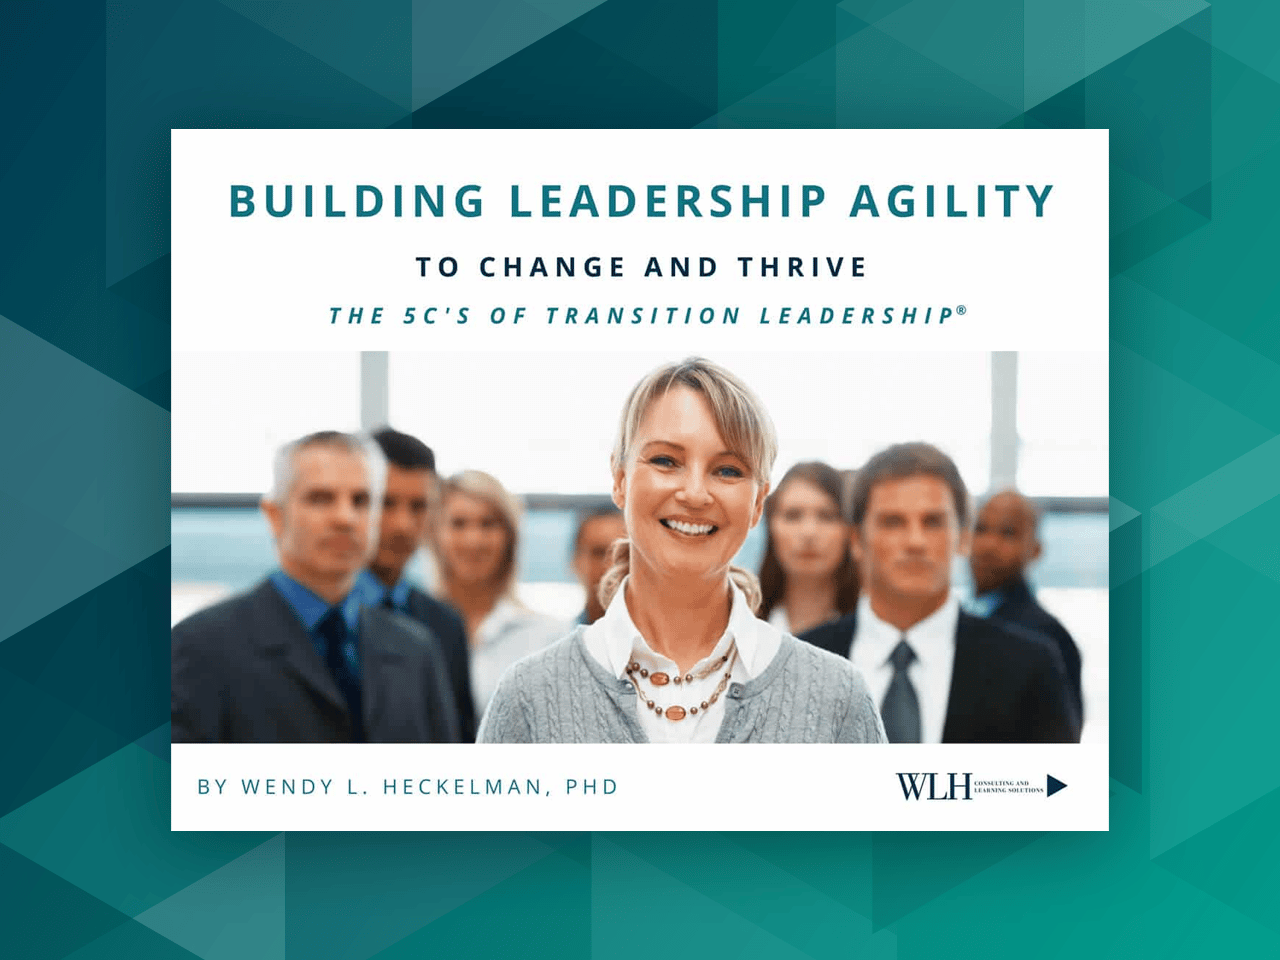 Building Leadership Agility to Change and Thrive: The 5C’s of Transition Leadership®